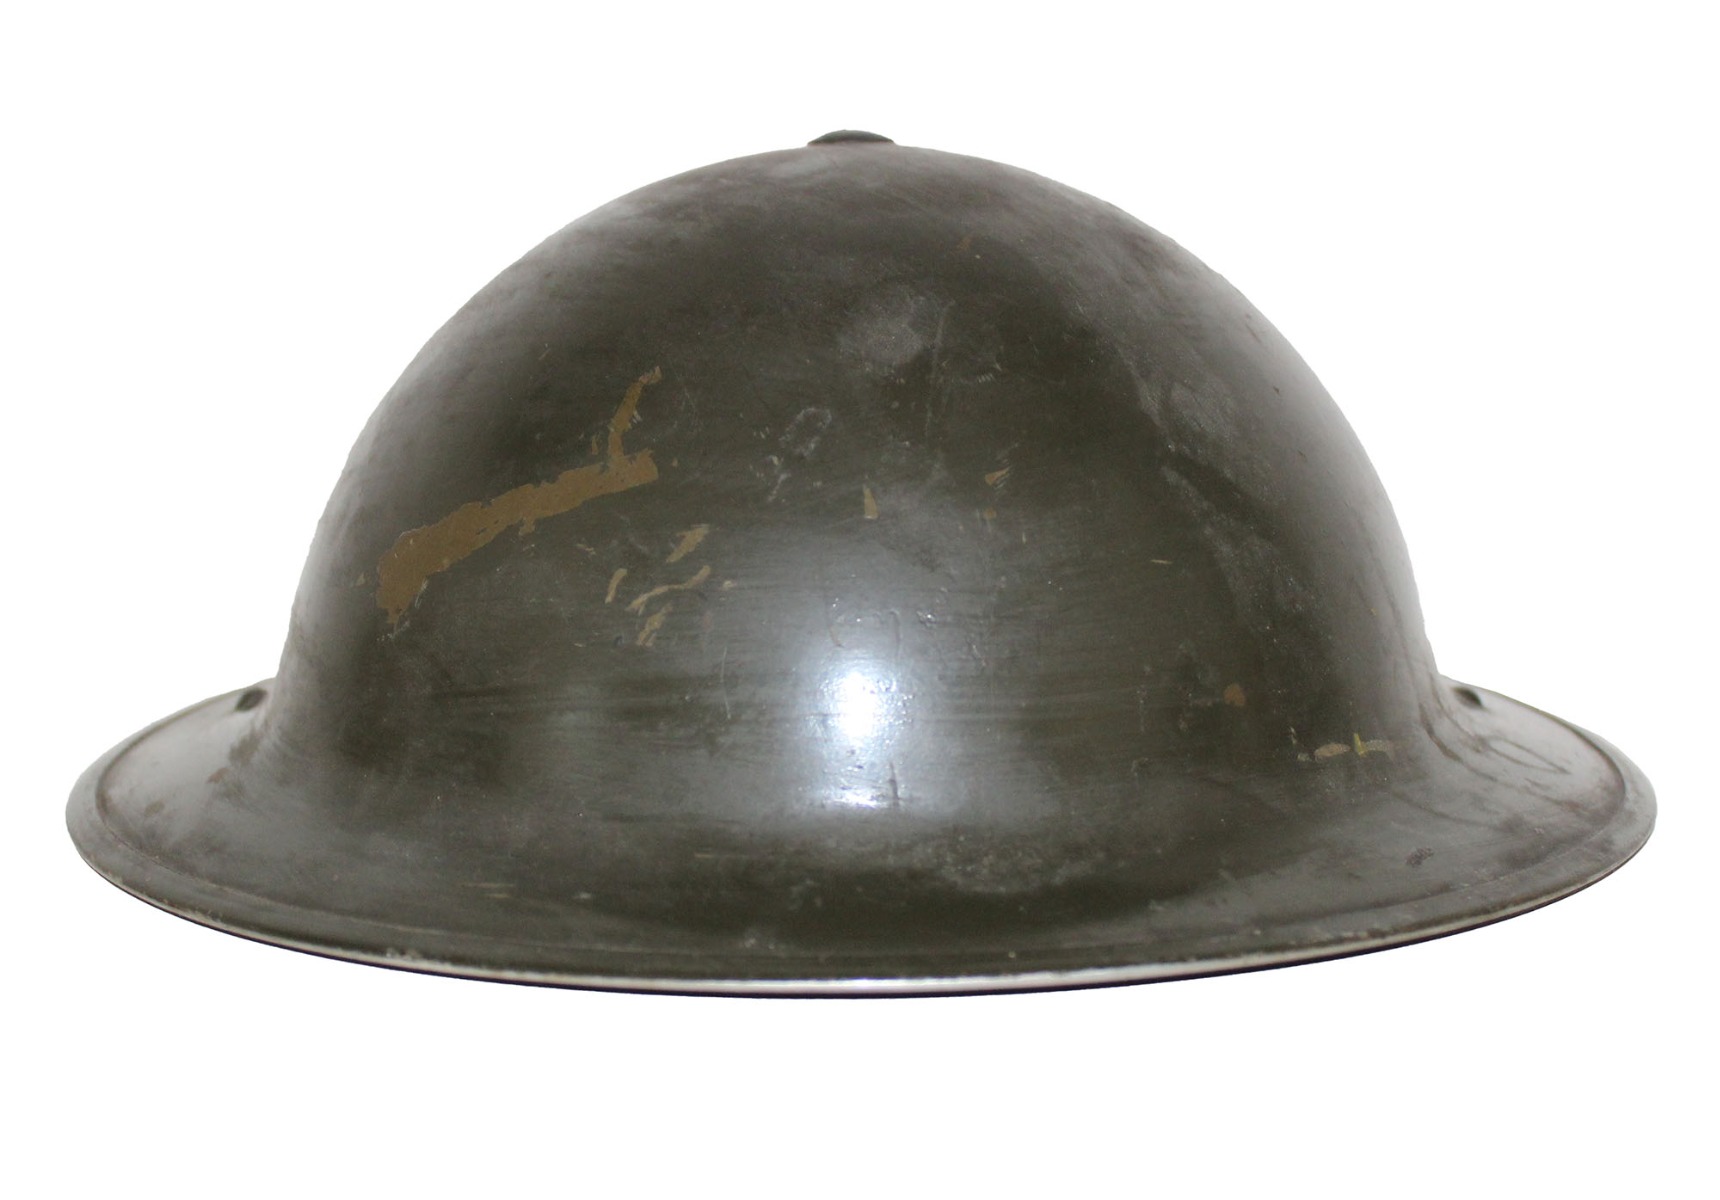 WW2 CANADIAN MARK II HELMET WITH LINER AND STRAP DATED 1941(GSW) 